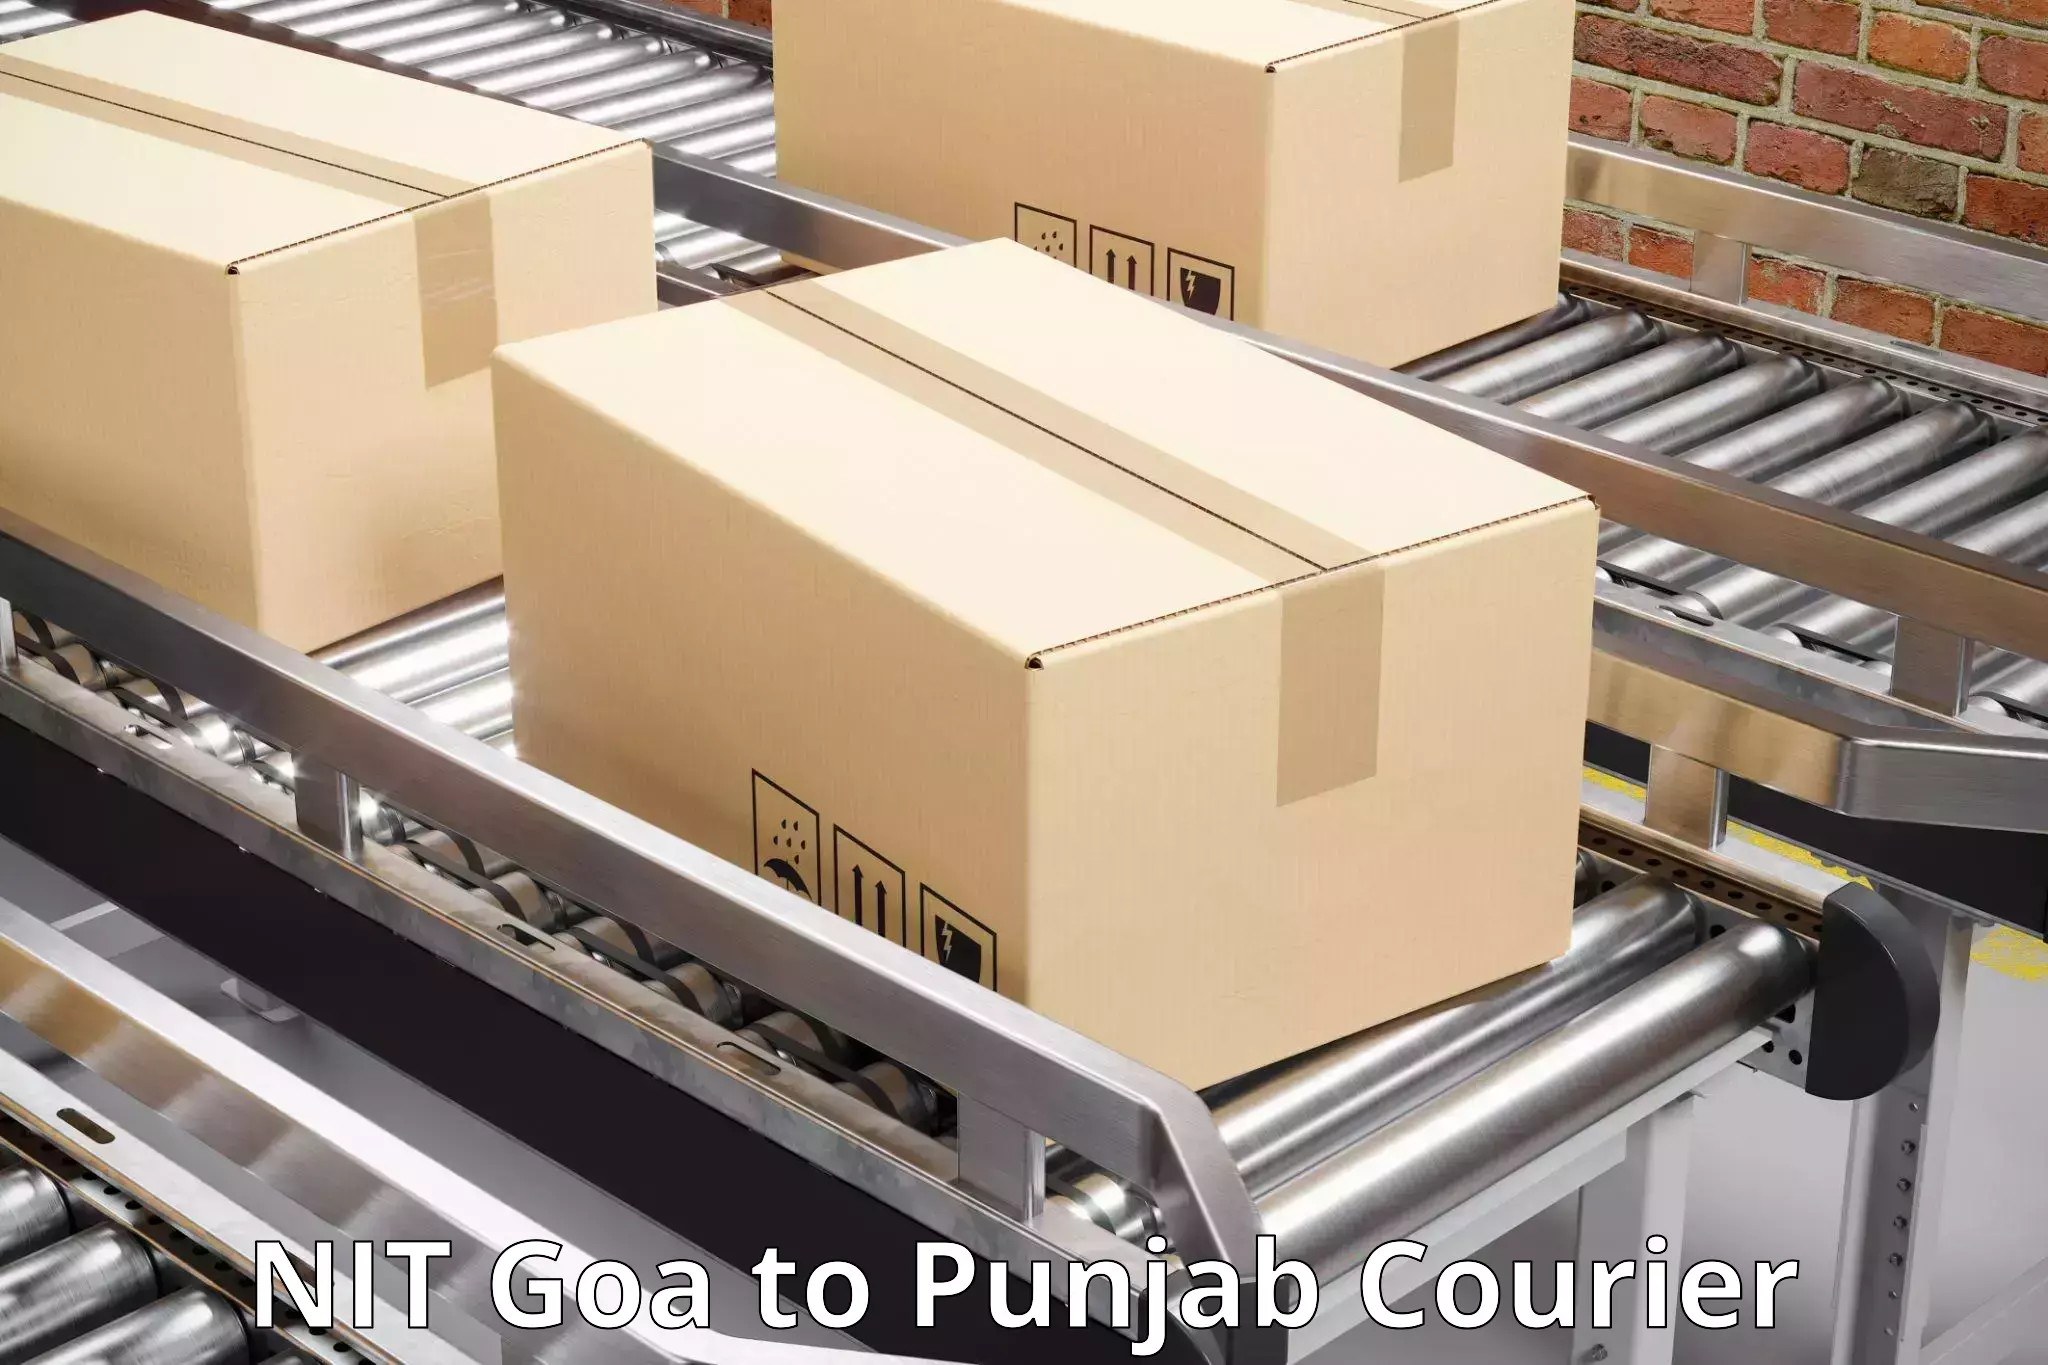 Residential courier service NIT Goa to Fatehgarh Sahib